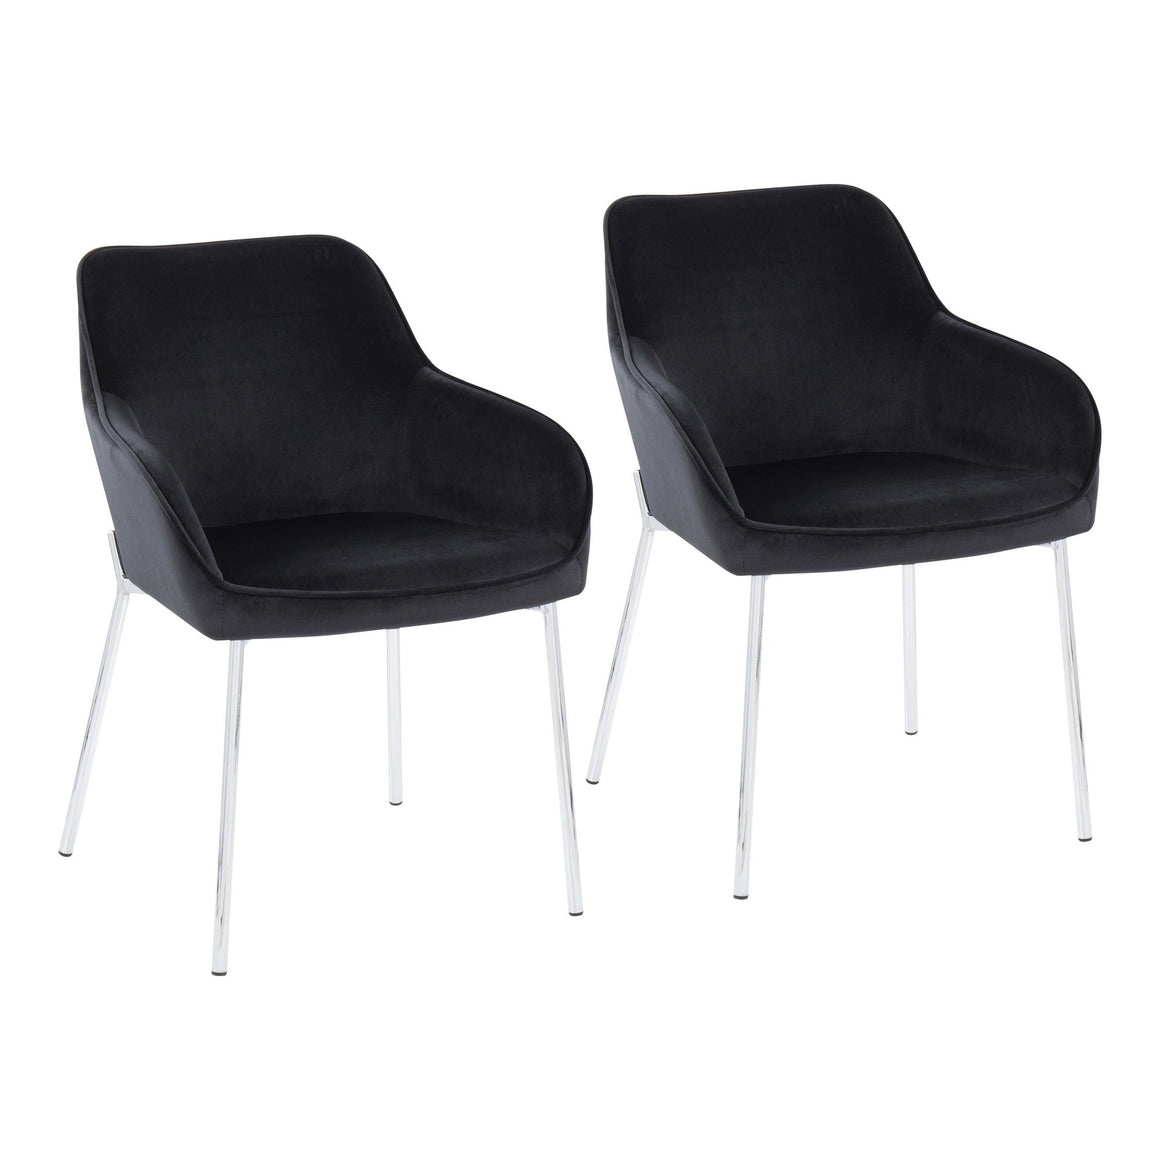 Daniella Contemporary Dining Chair in Chrome Steel and Black Velvet by LumiSource - Set of 2